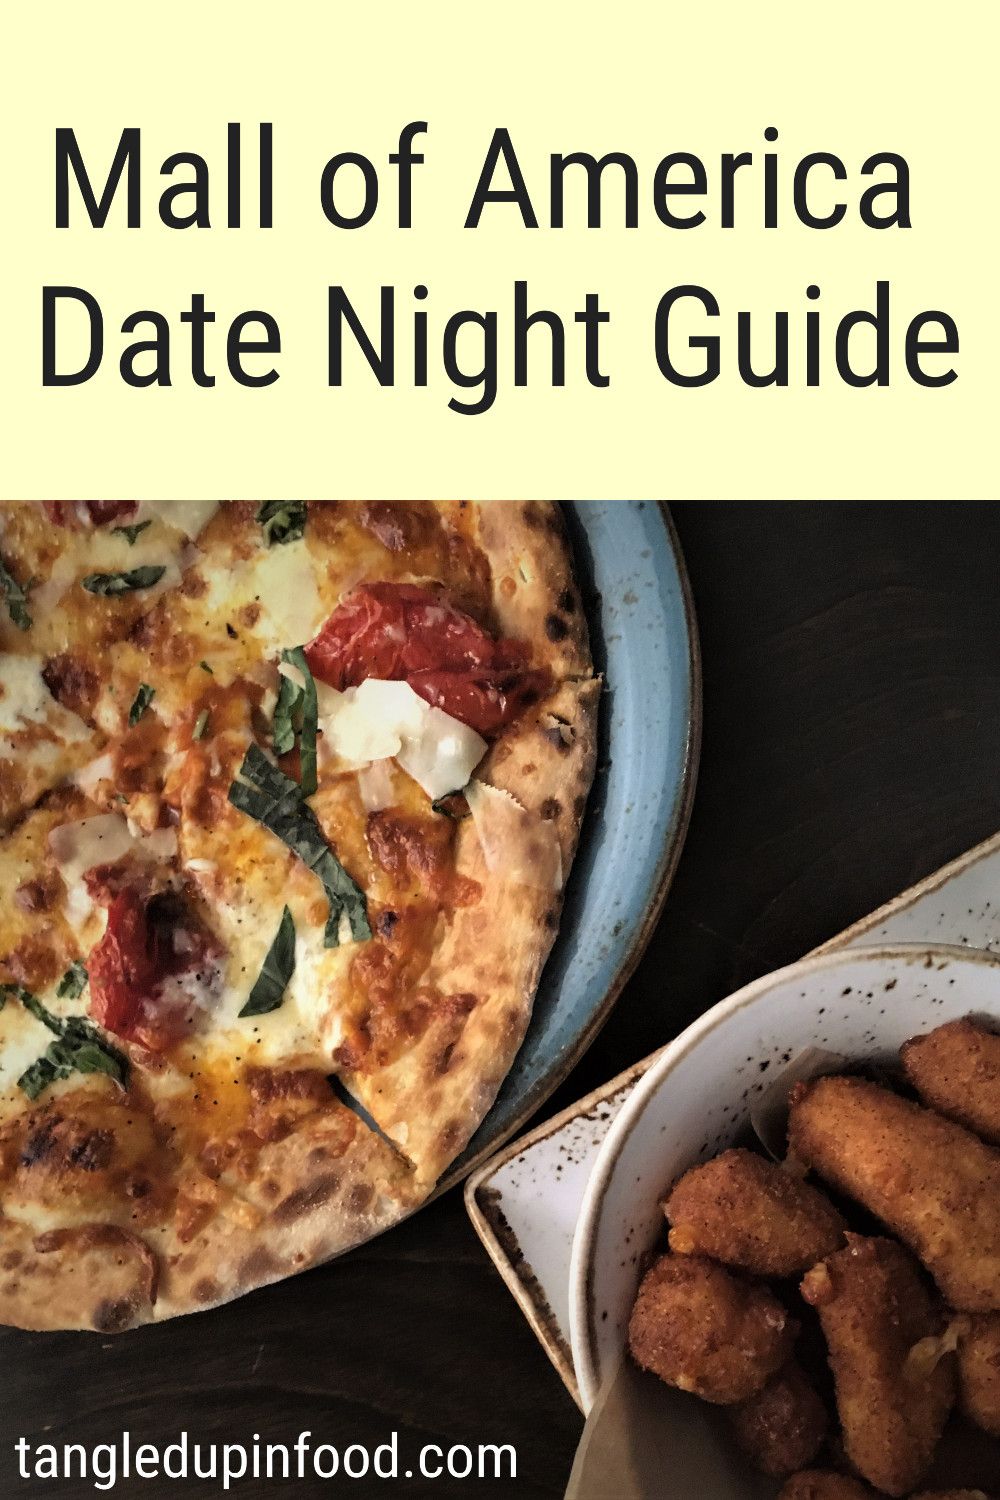 Photo of margherita pizza and fried cheese curds with text reading "Mall of America Date NIght Guide"